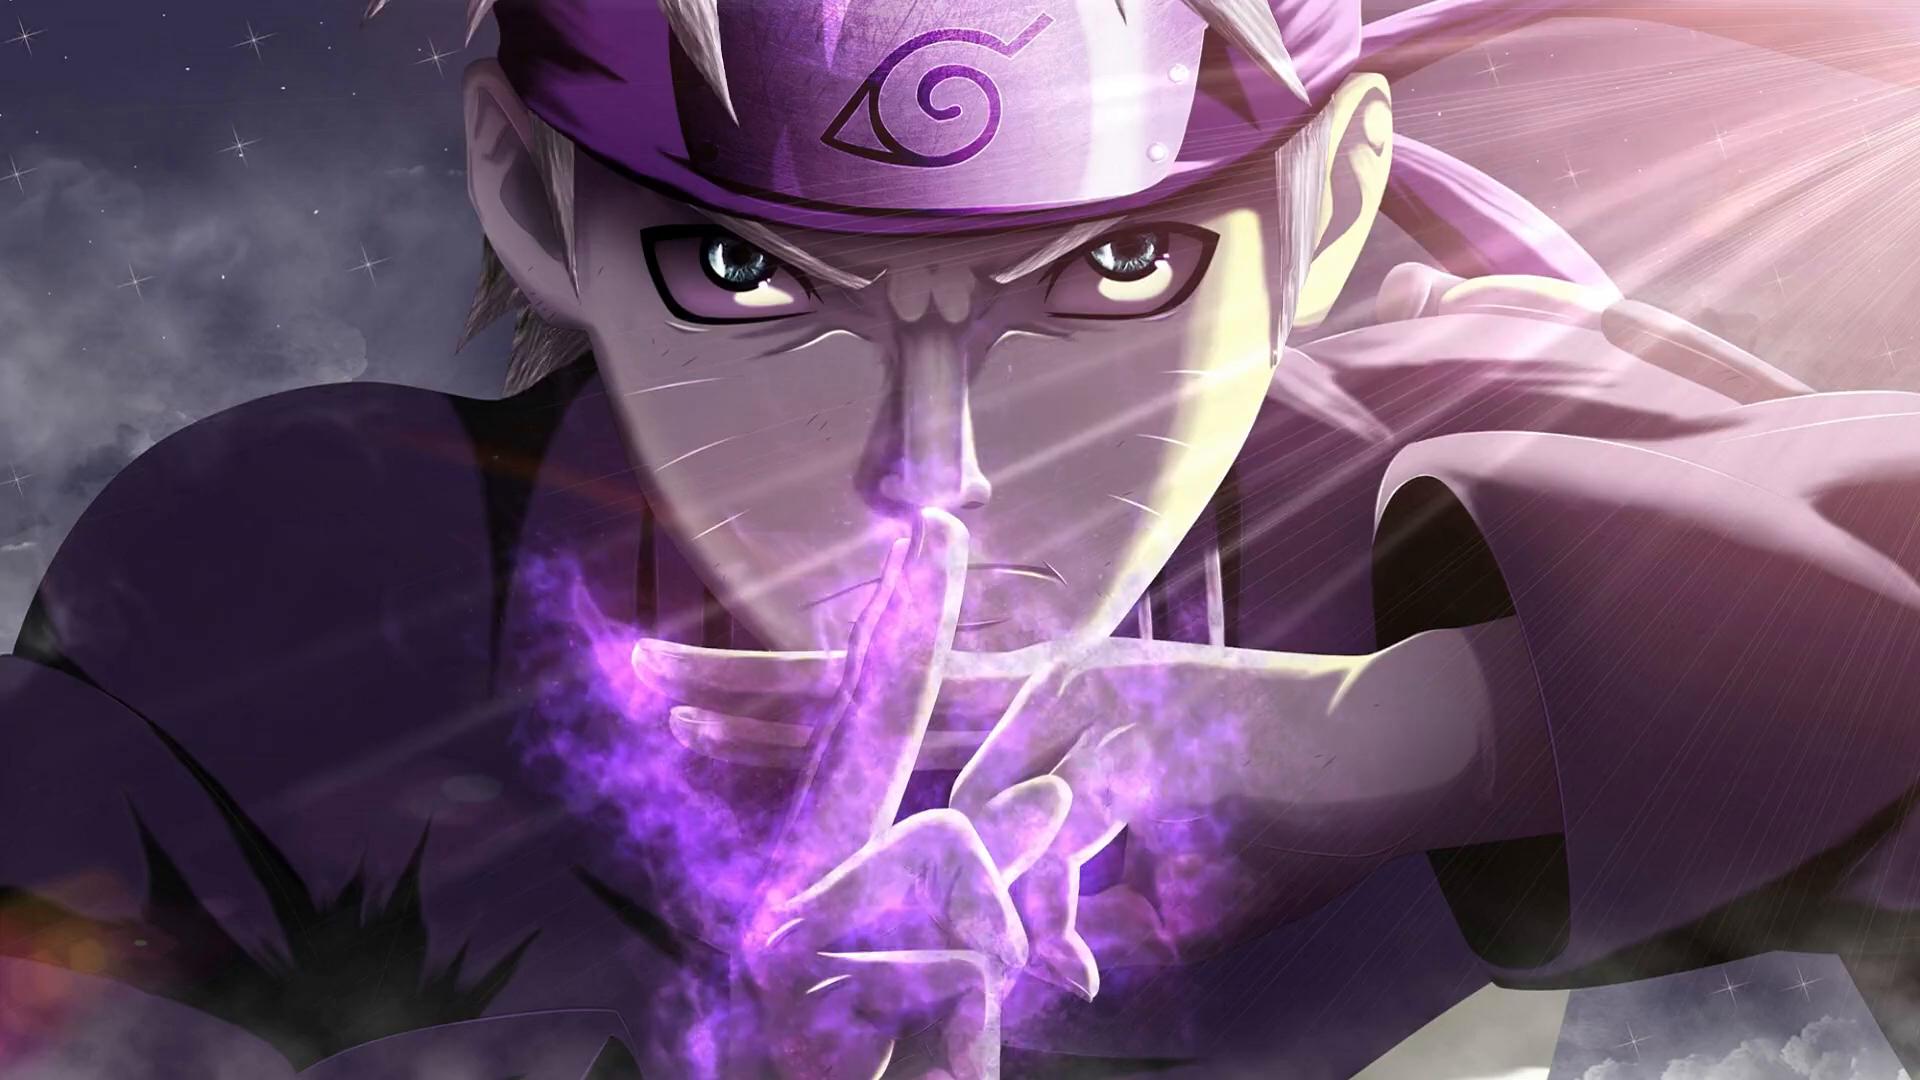 Top 50 Most Popular Anime Powers Of All Time